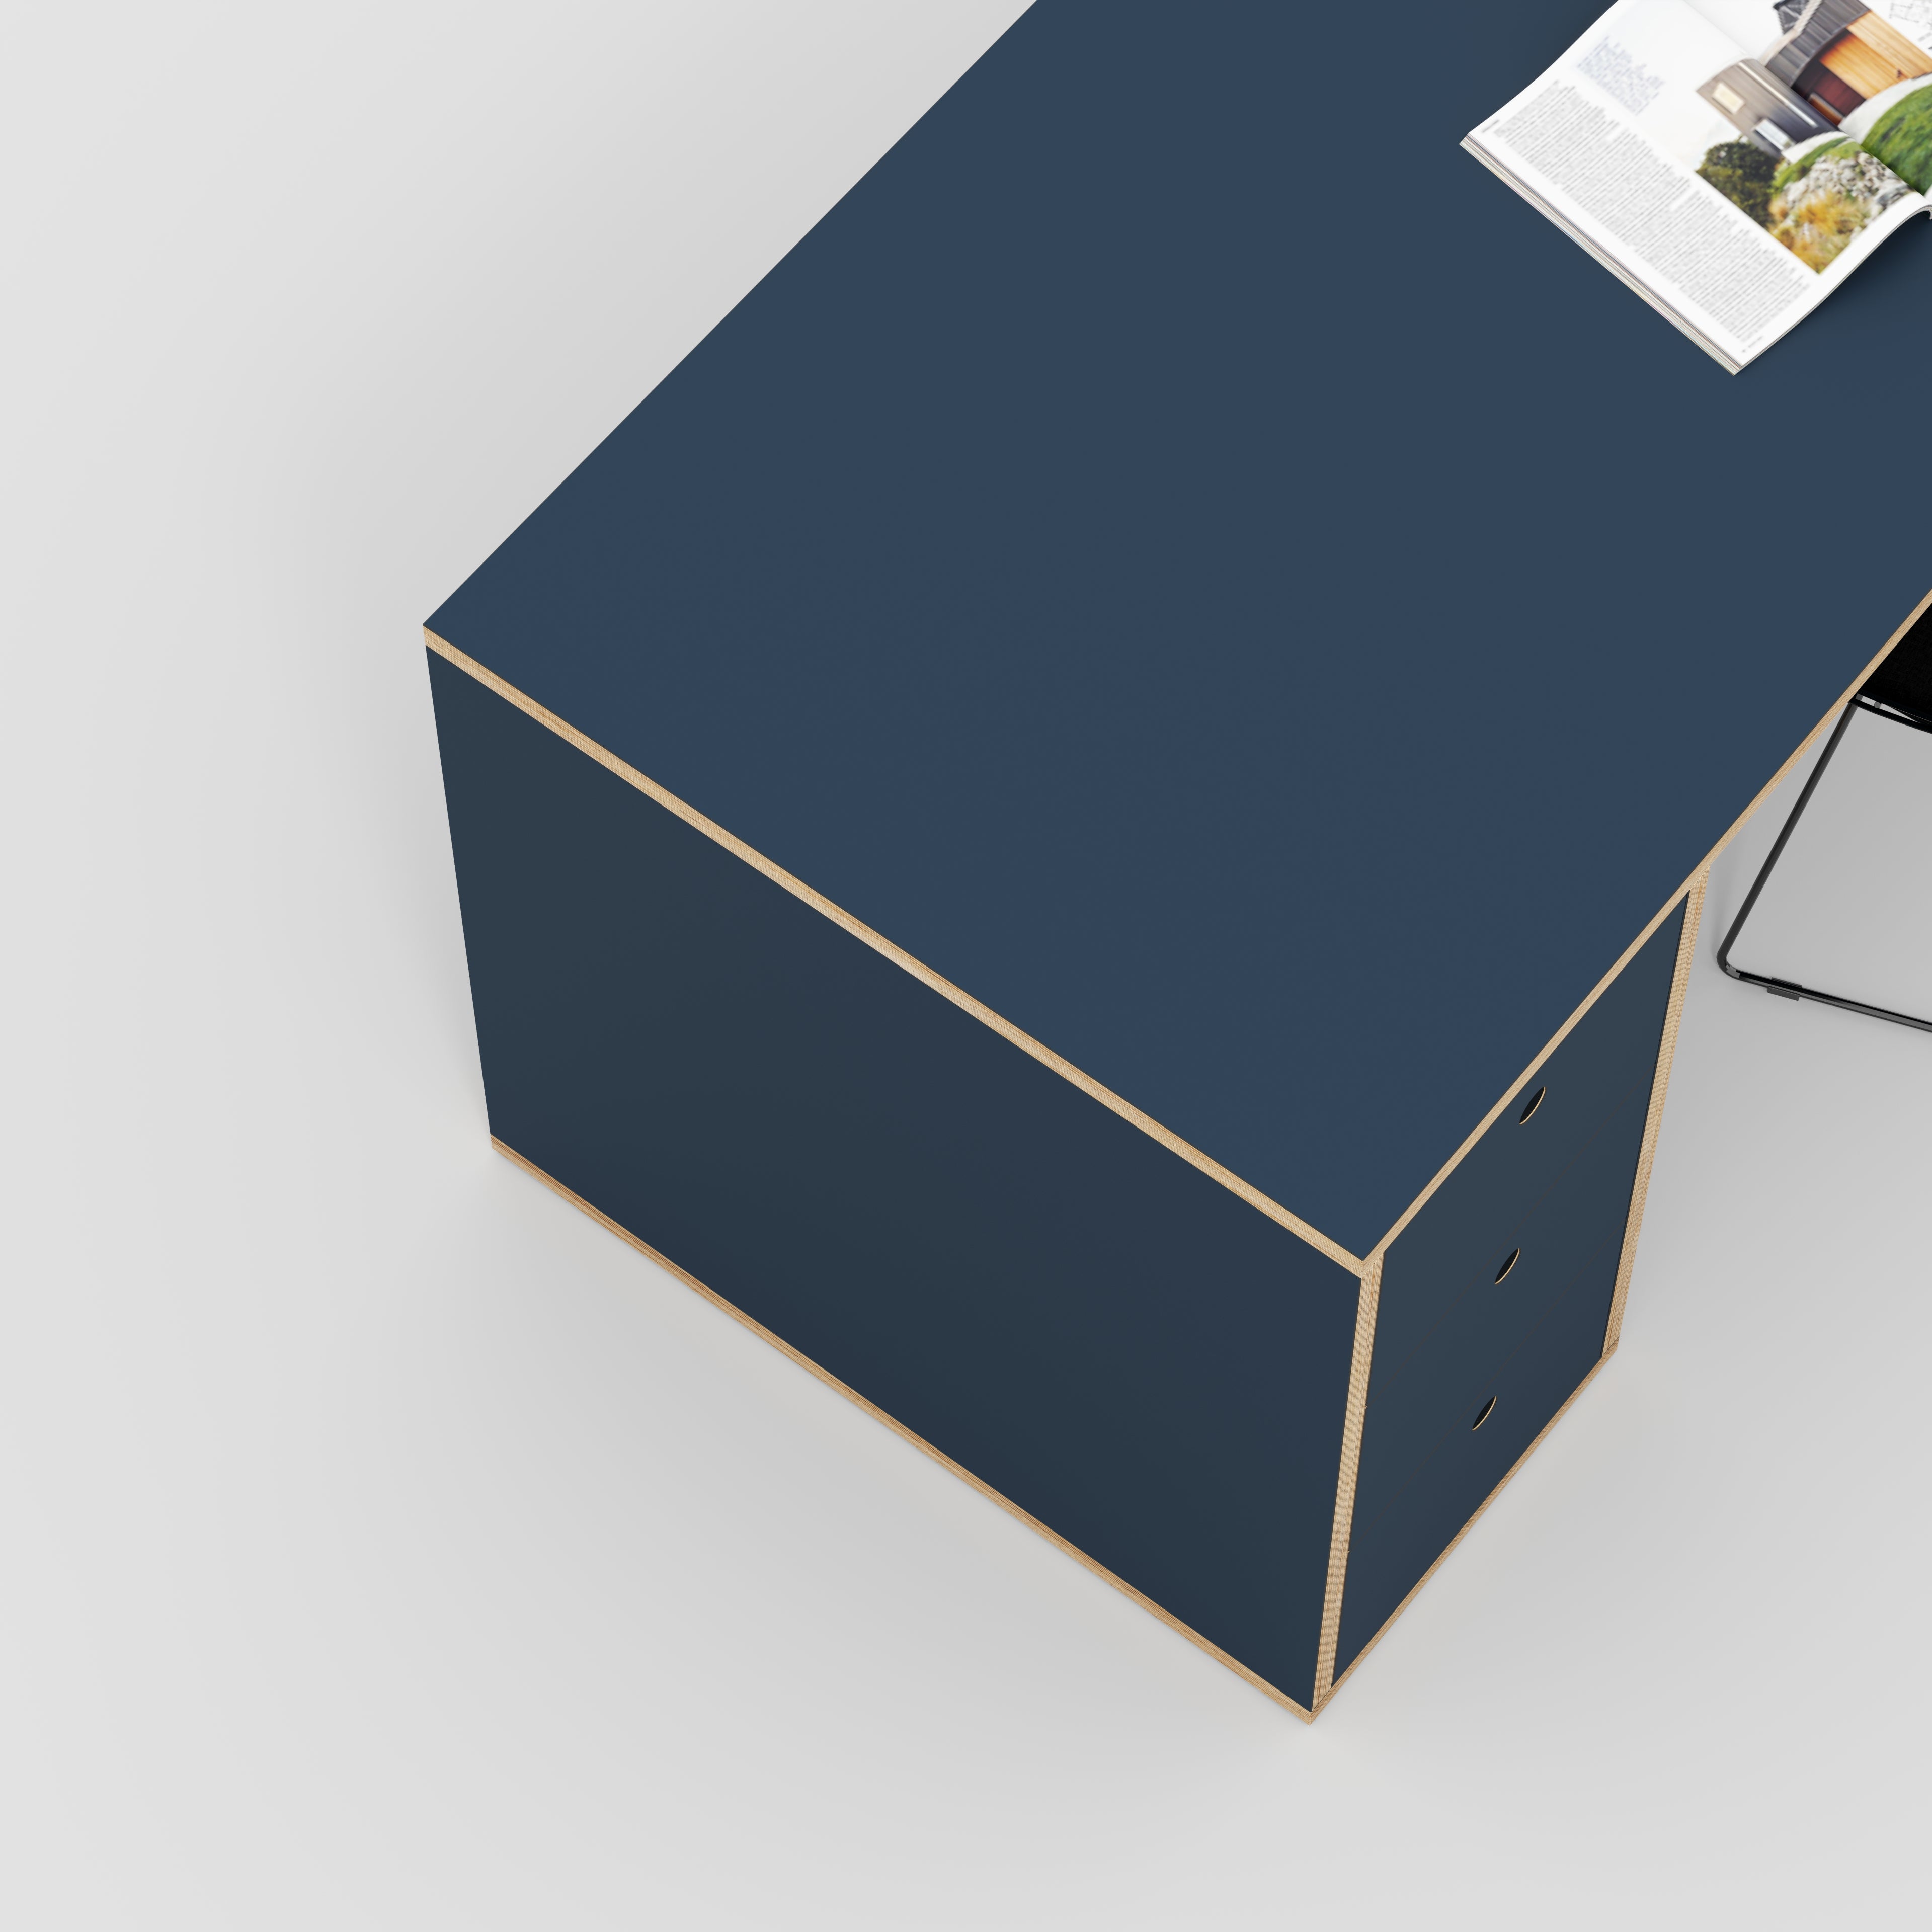 Desk with Storage Type 1 LH - Drawers - Formica Night Sea Blue - 1600(w) x 800(d) x 750(h)